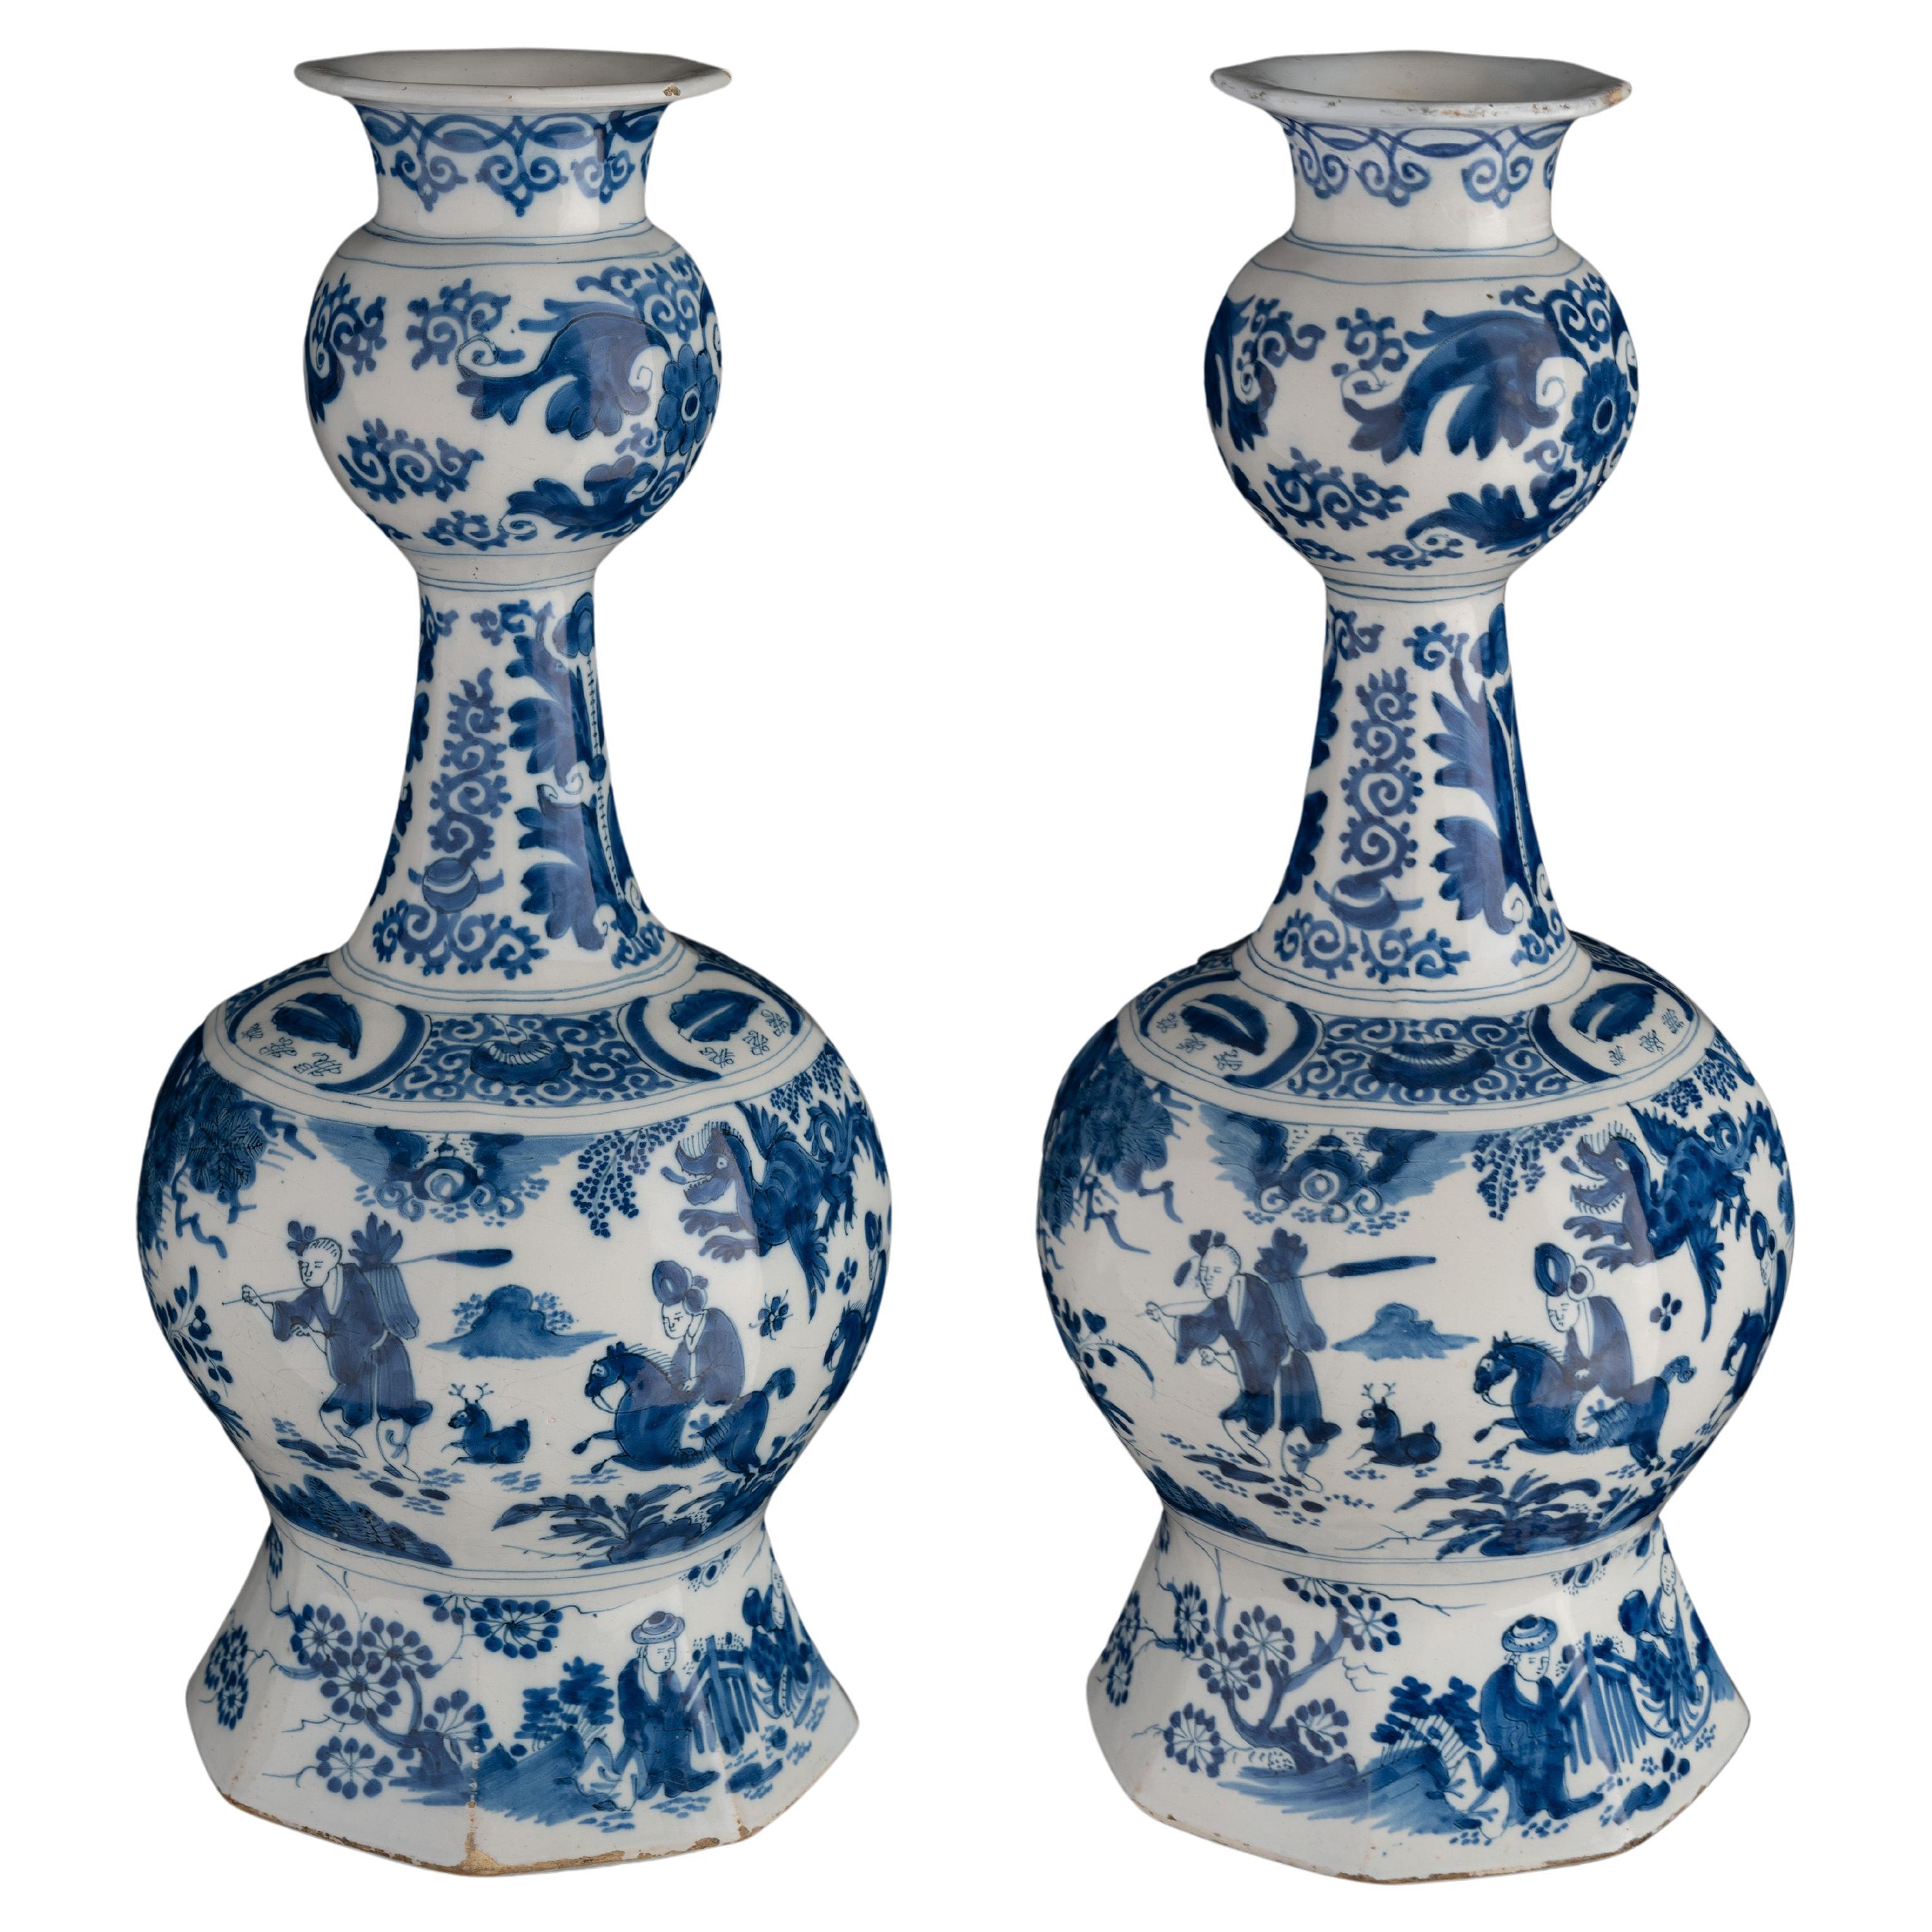 Delft Pair of blue and white garlic-head chinoiserie bottle vases 1680-1690